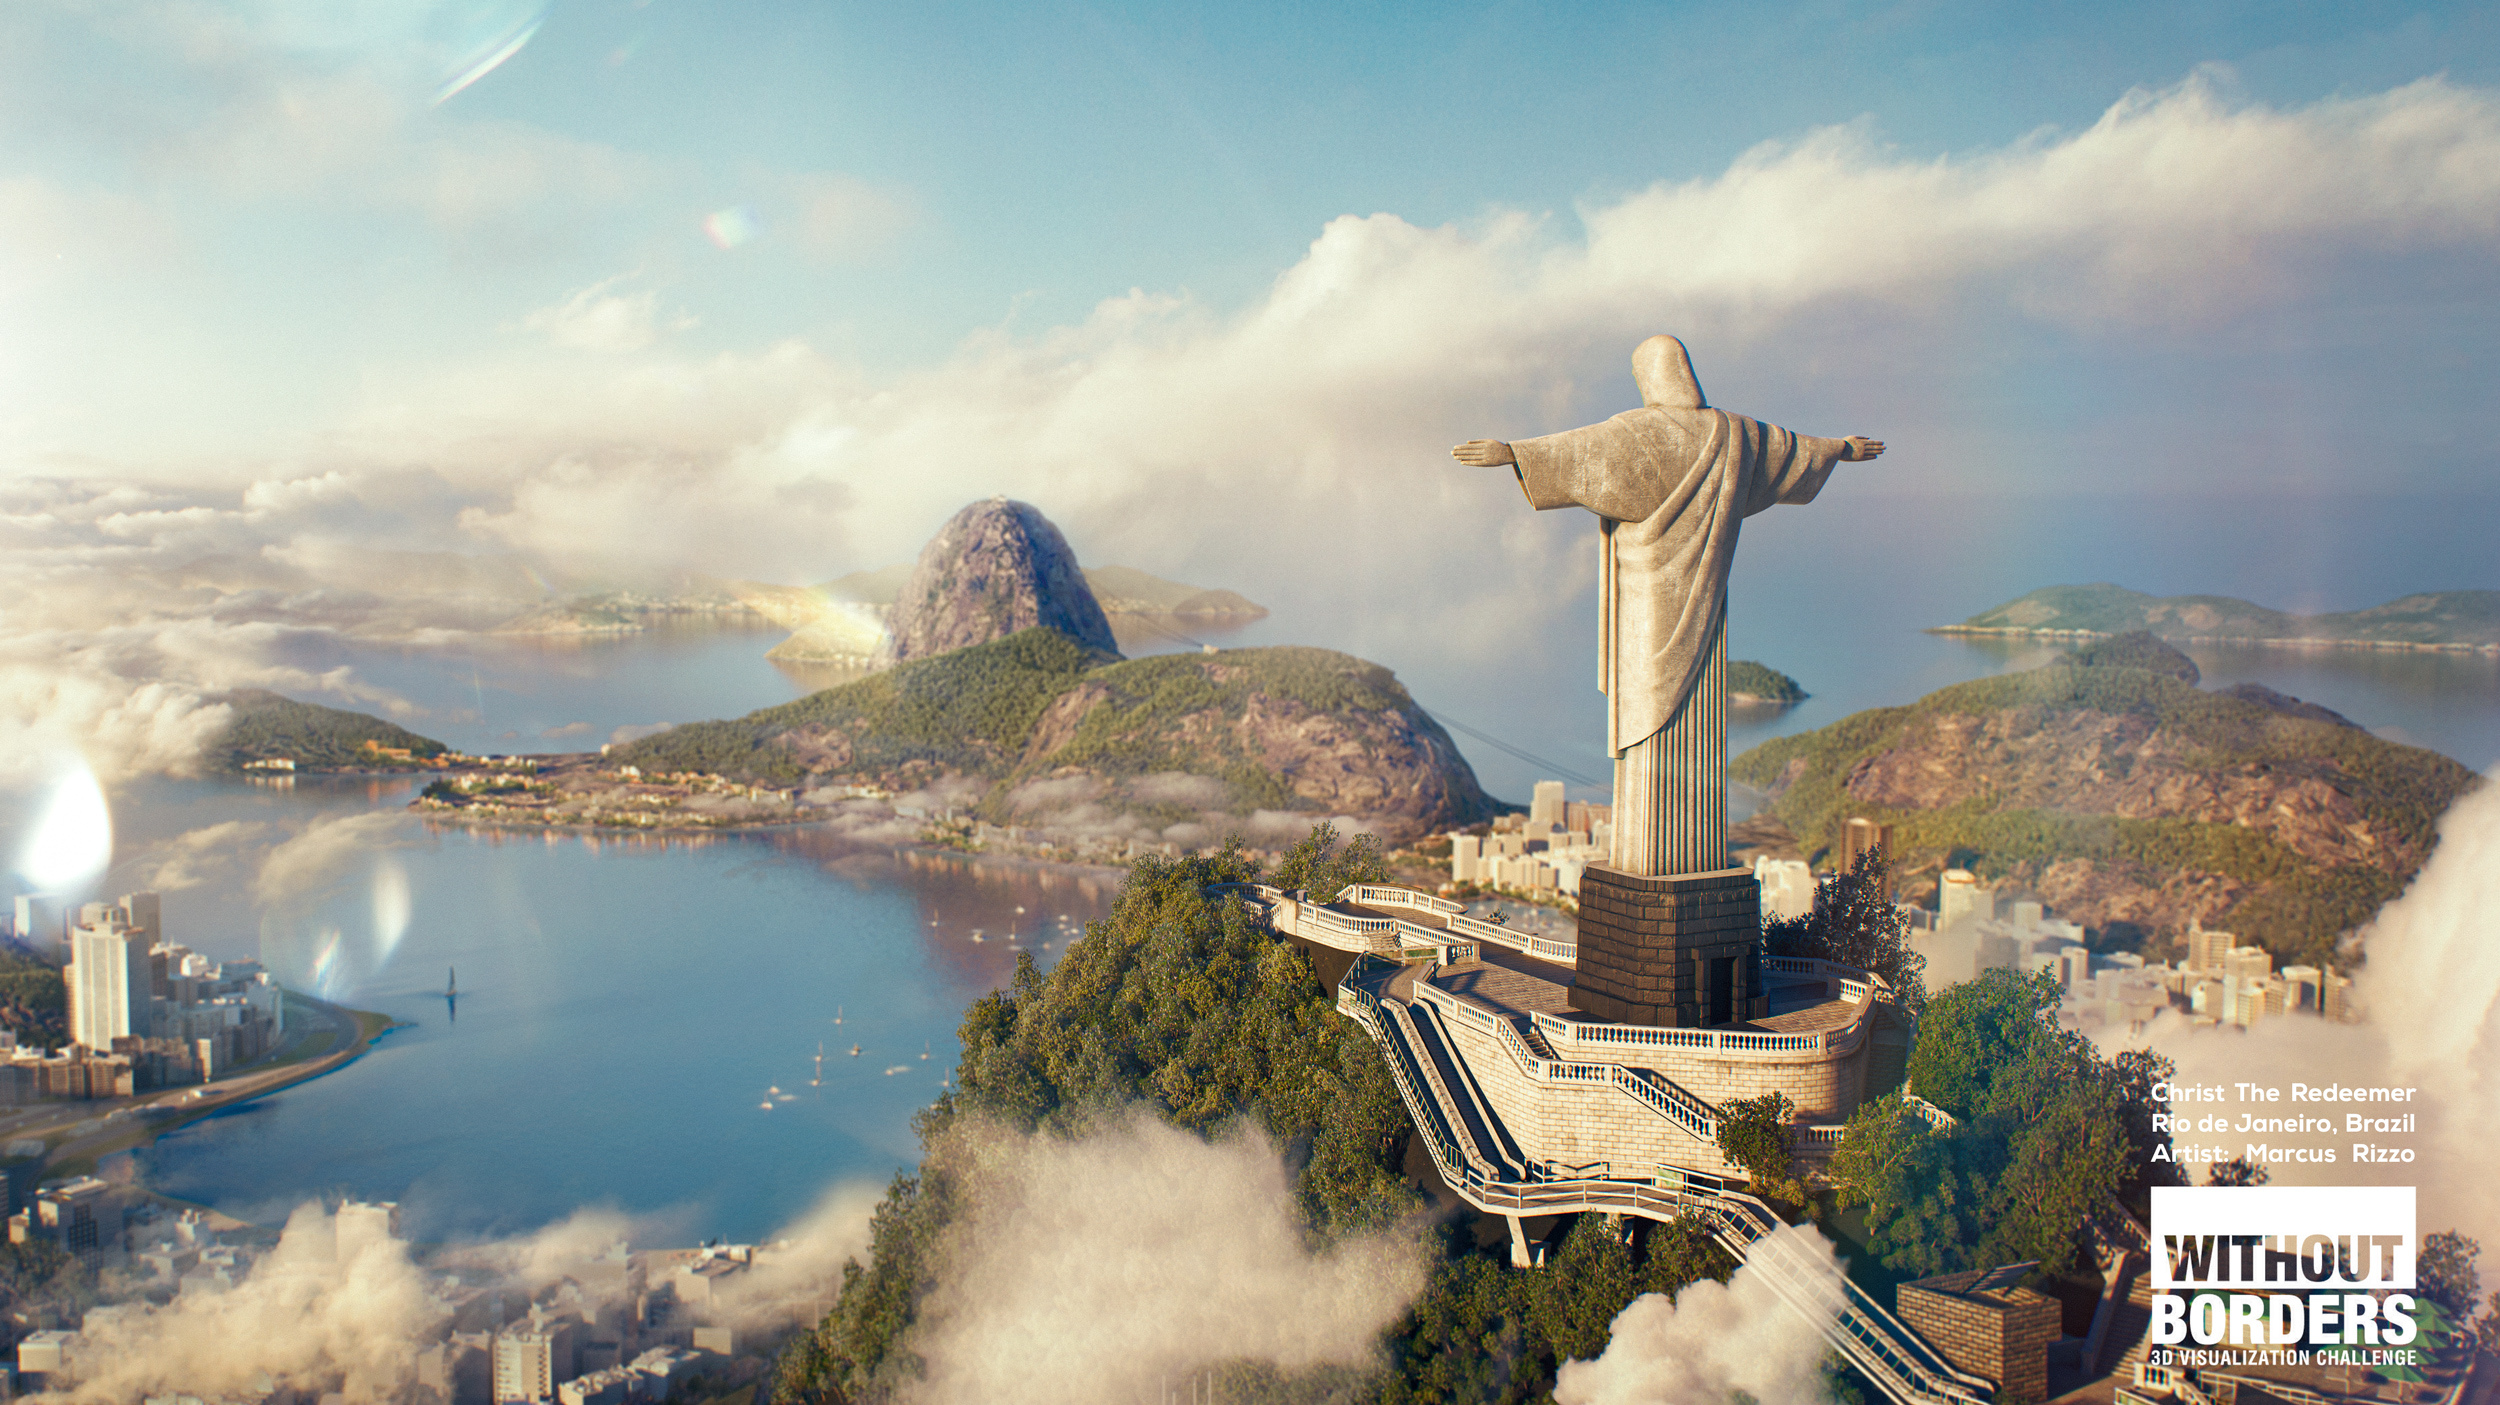 Christ The Redeemer by Marcus Rizzo